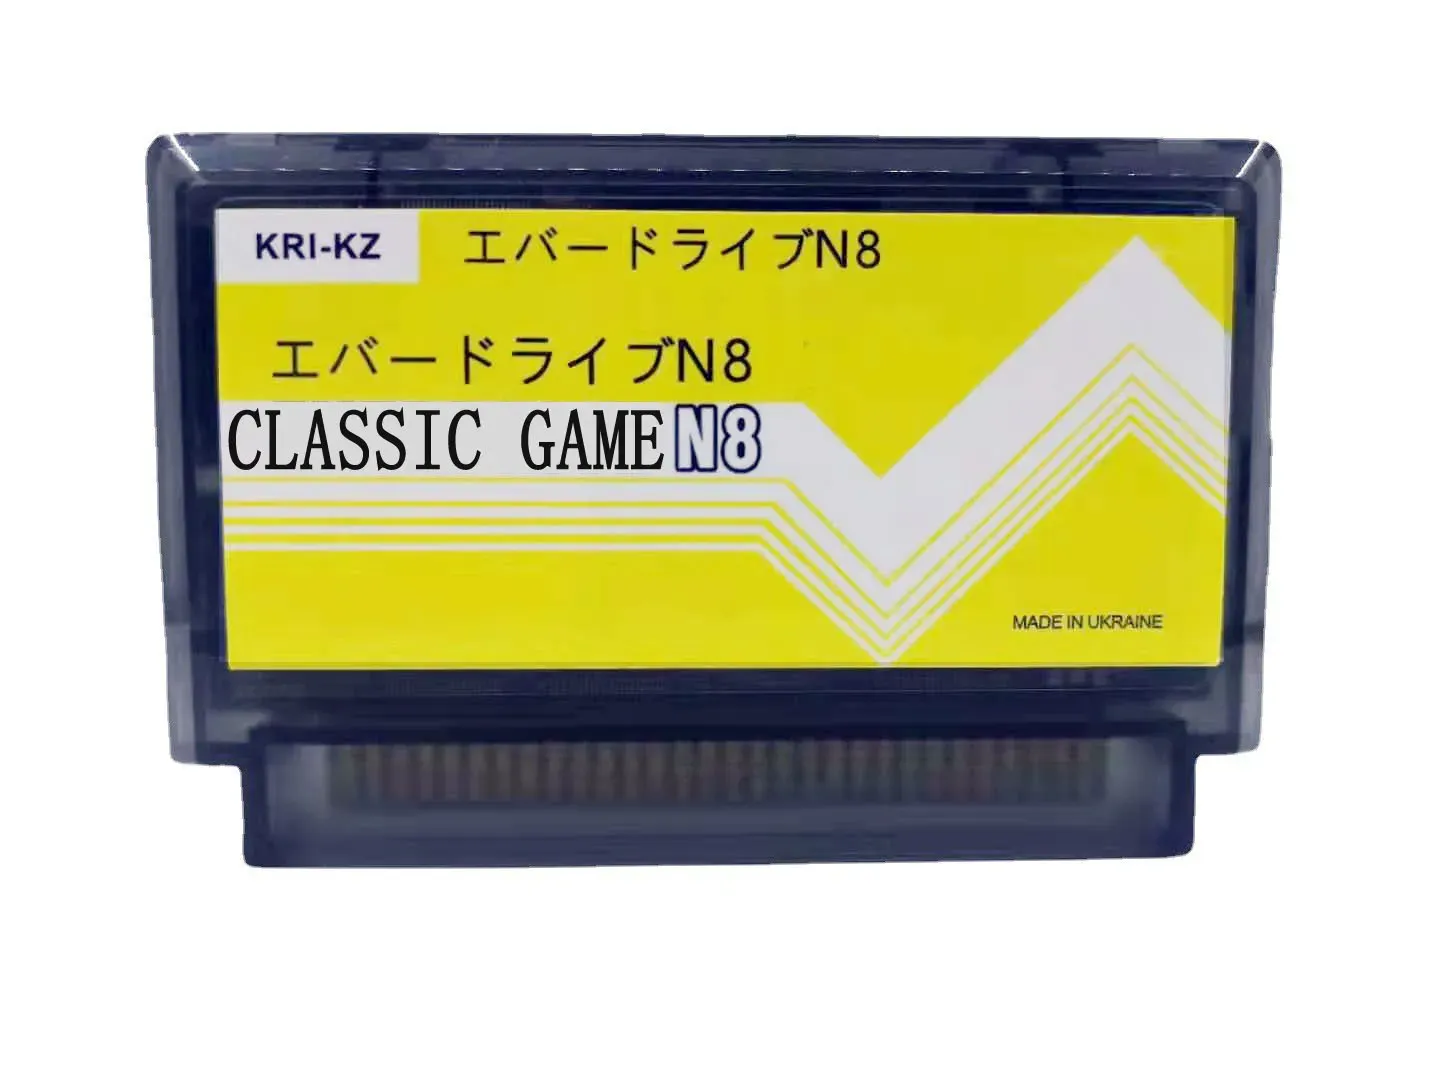 Cards 2000 In 1 China Version FC N8 Retro Video Game Card, Suitable For Ever Drive Series Such As FC Game Consoles